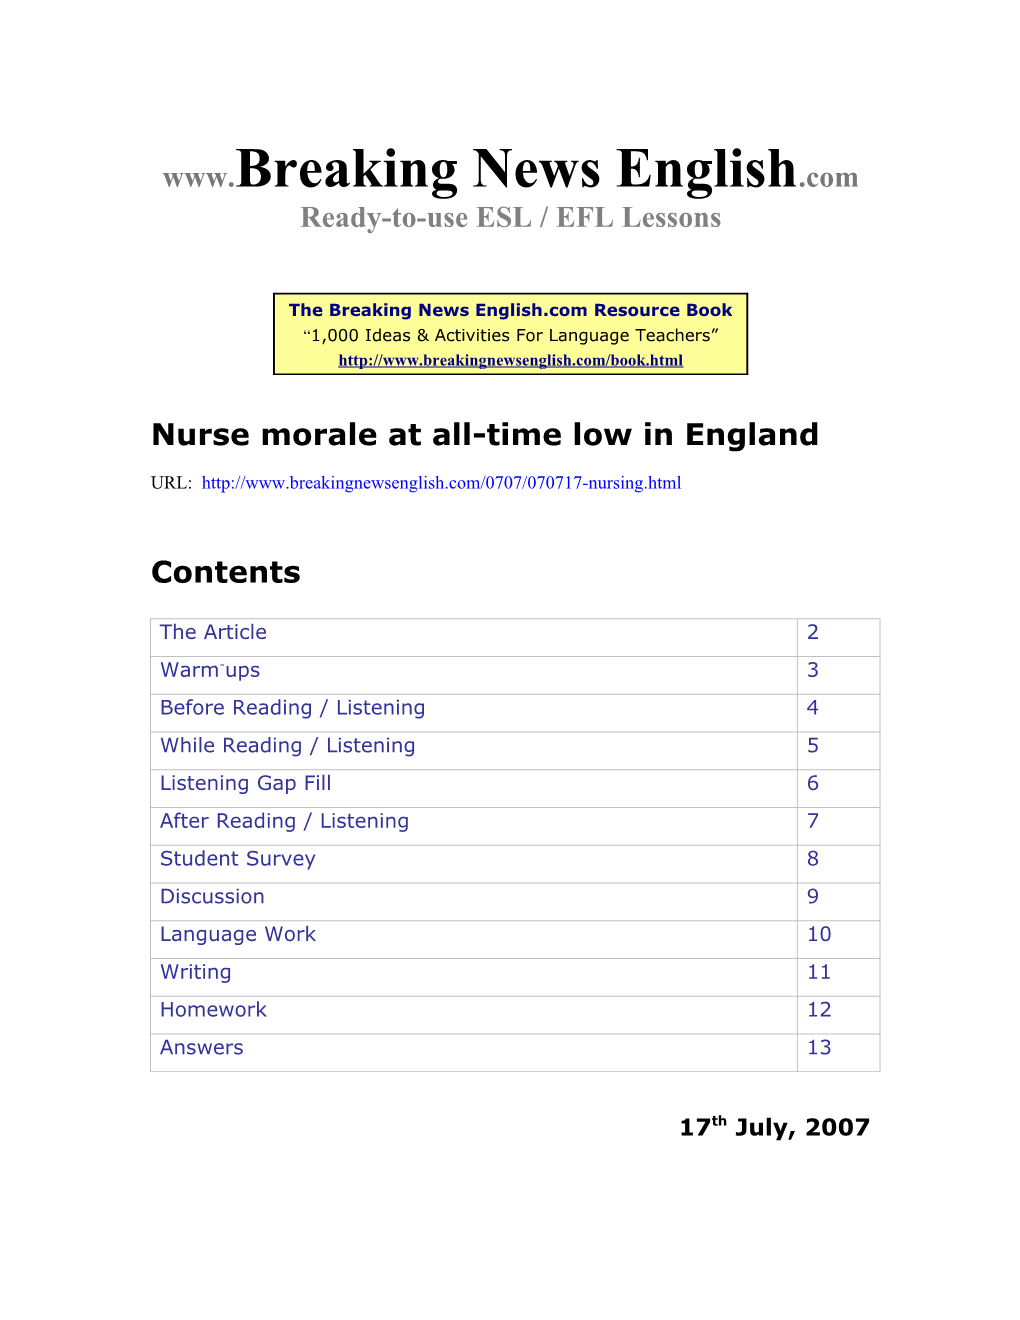 Nurse Morale at All-Time Low in England